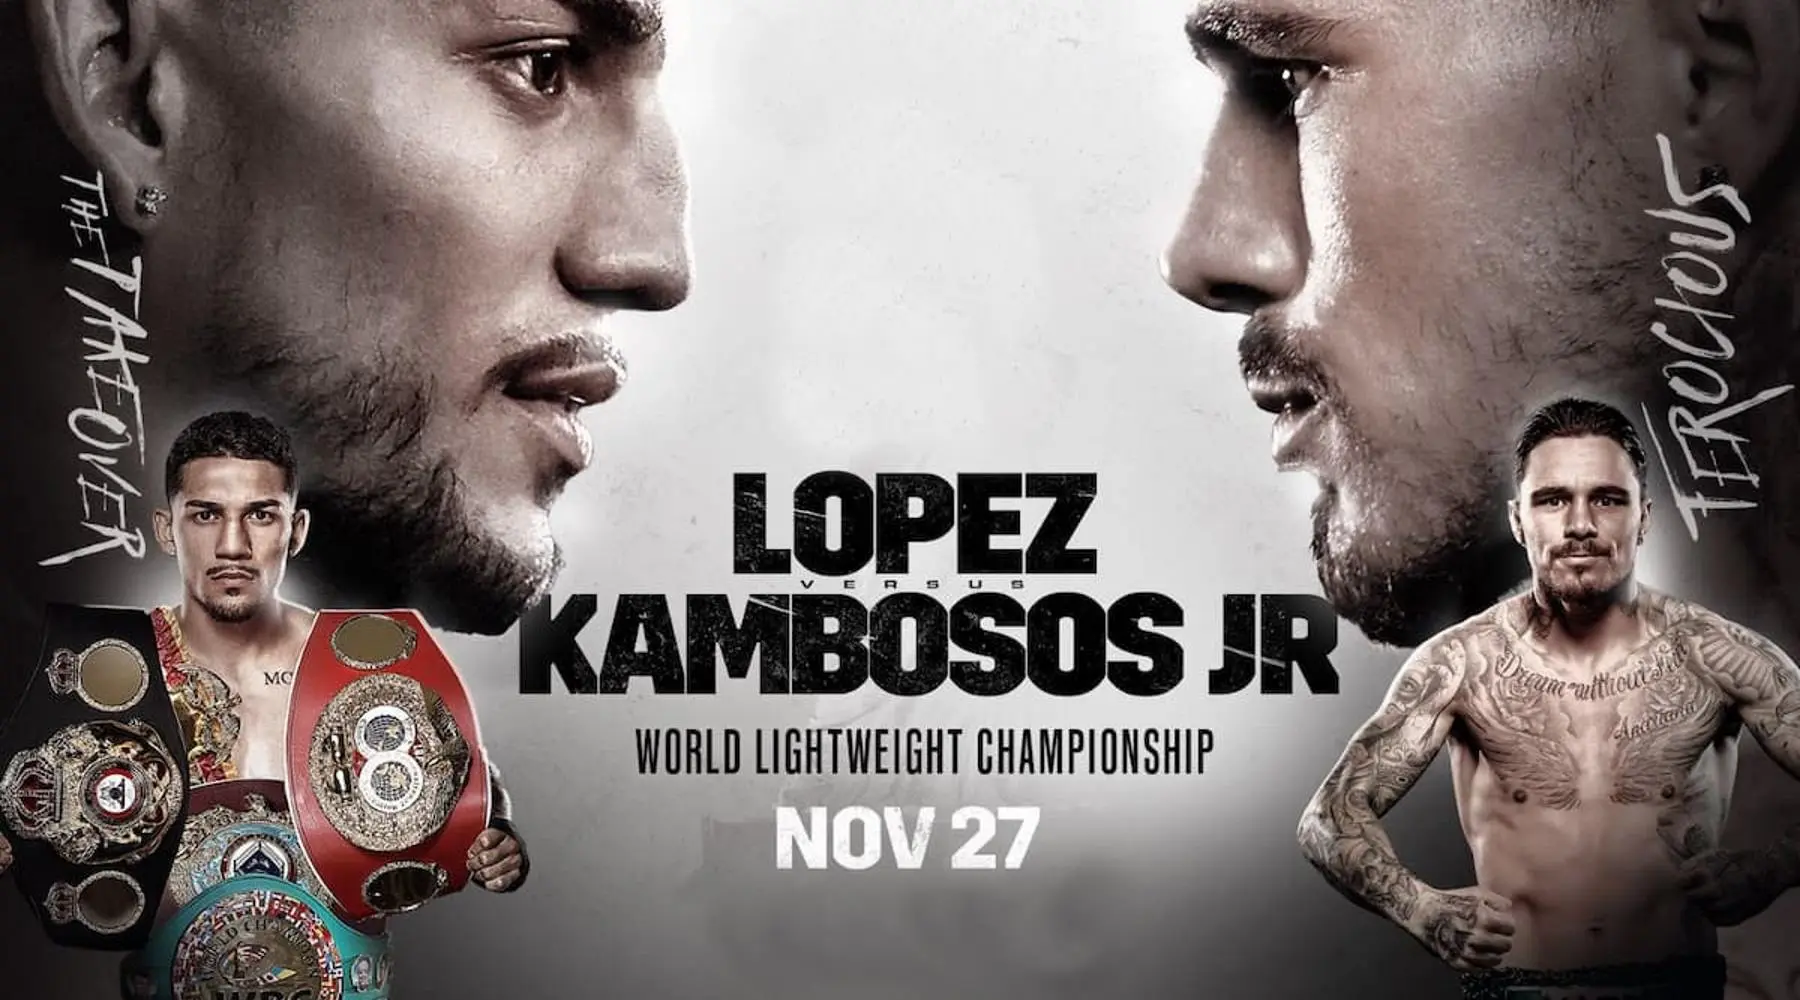 How to watch López vs Kambosos boxing world title fight in Australia